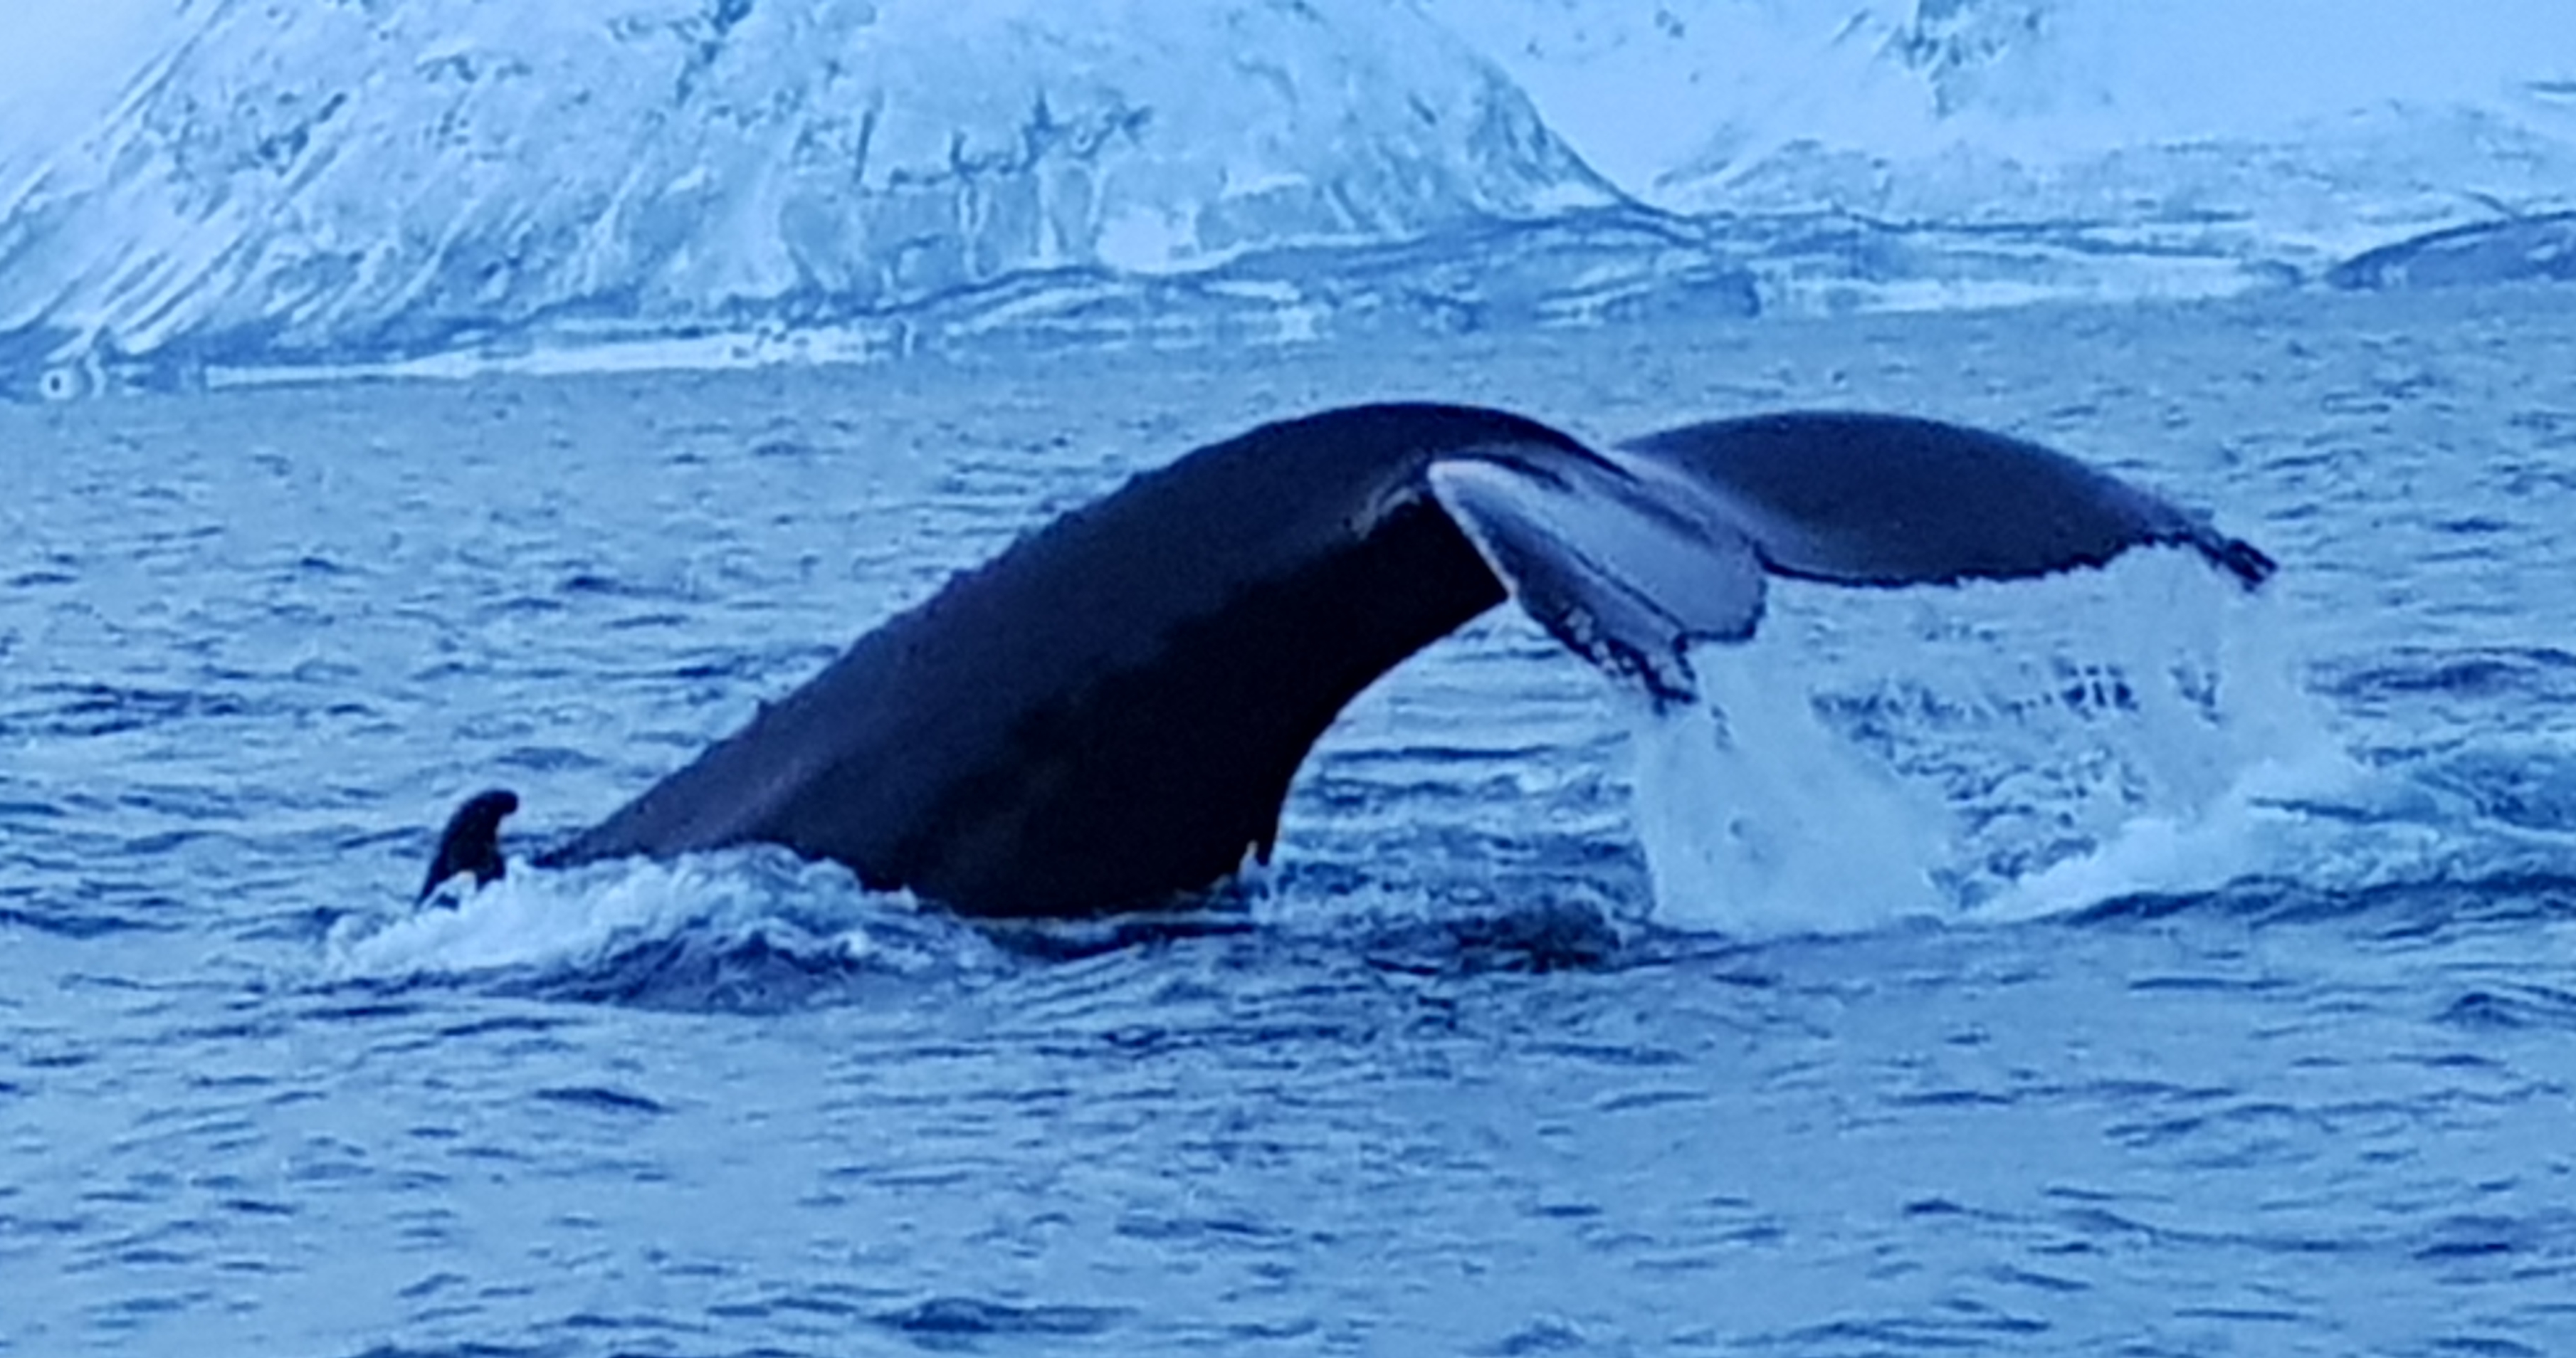 Whale watching in Tromso